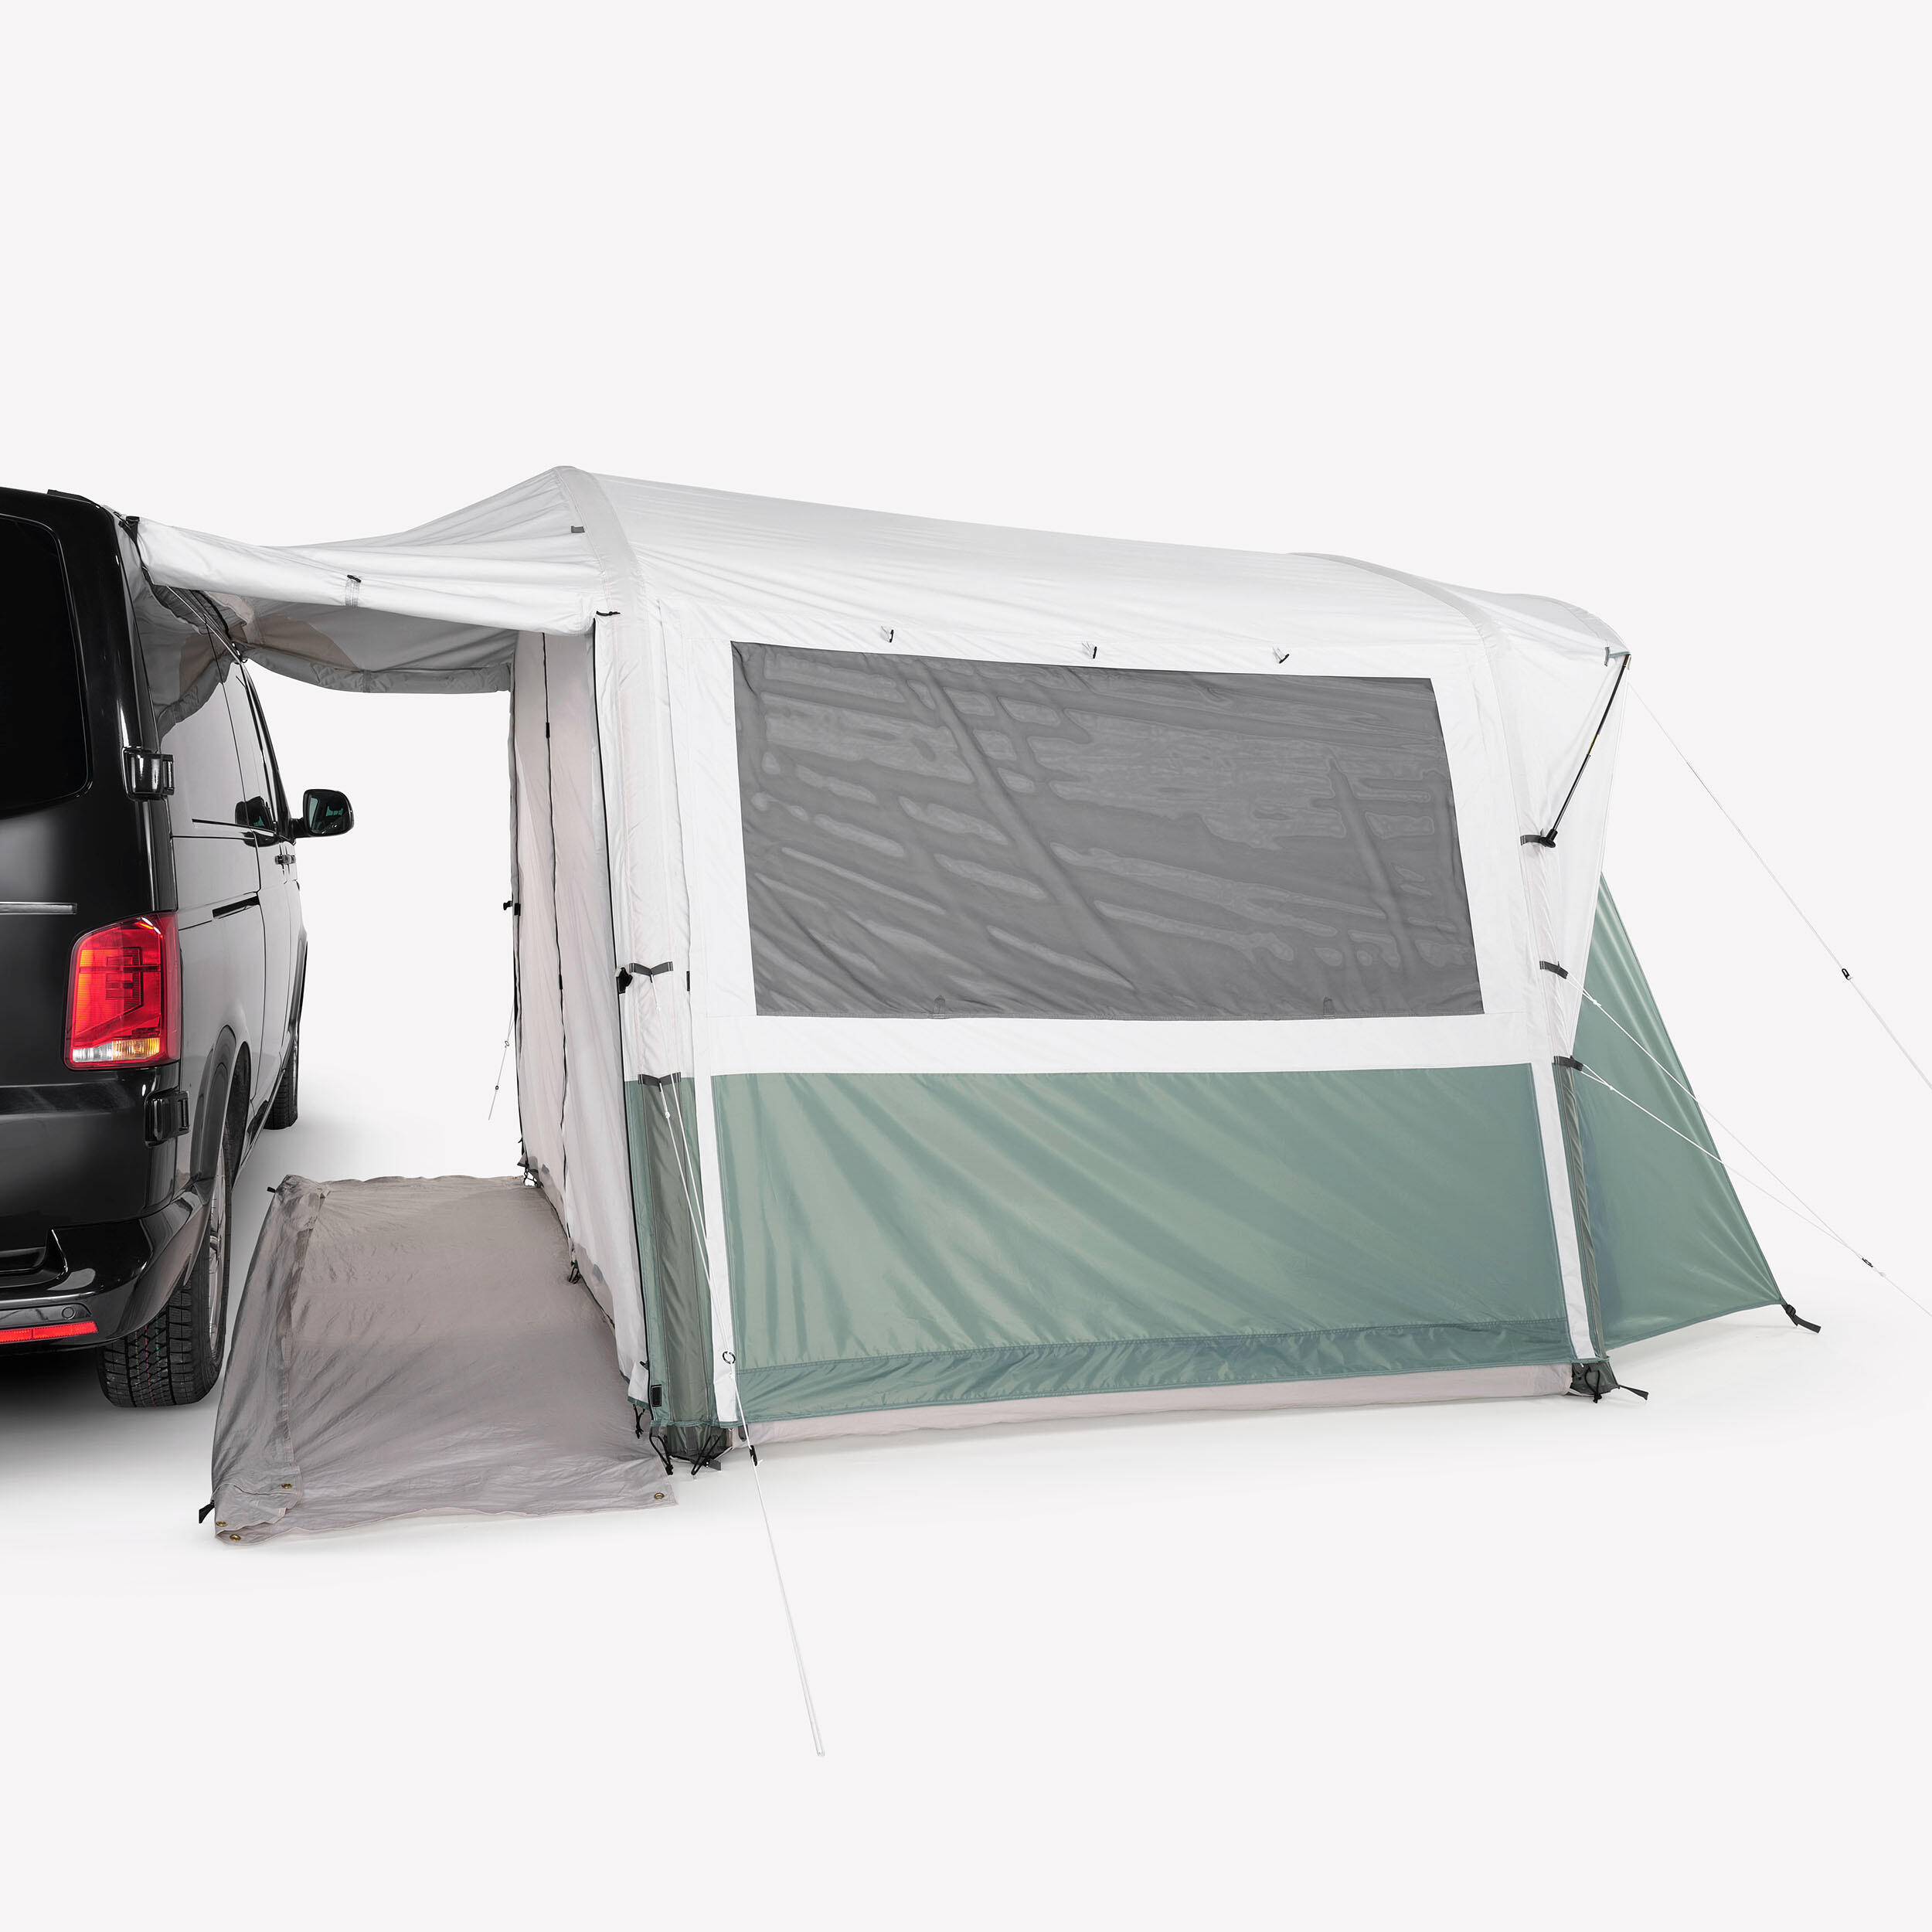 Van and truck inflatable canopy - Van Connect Air Seconds Fresh - 6 people 10/15